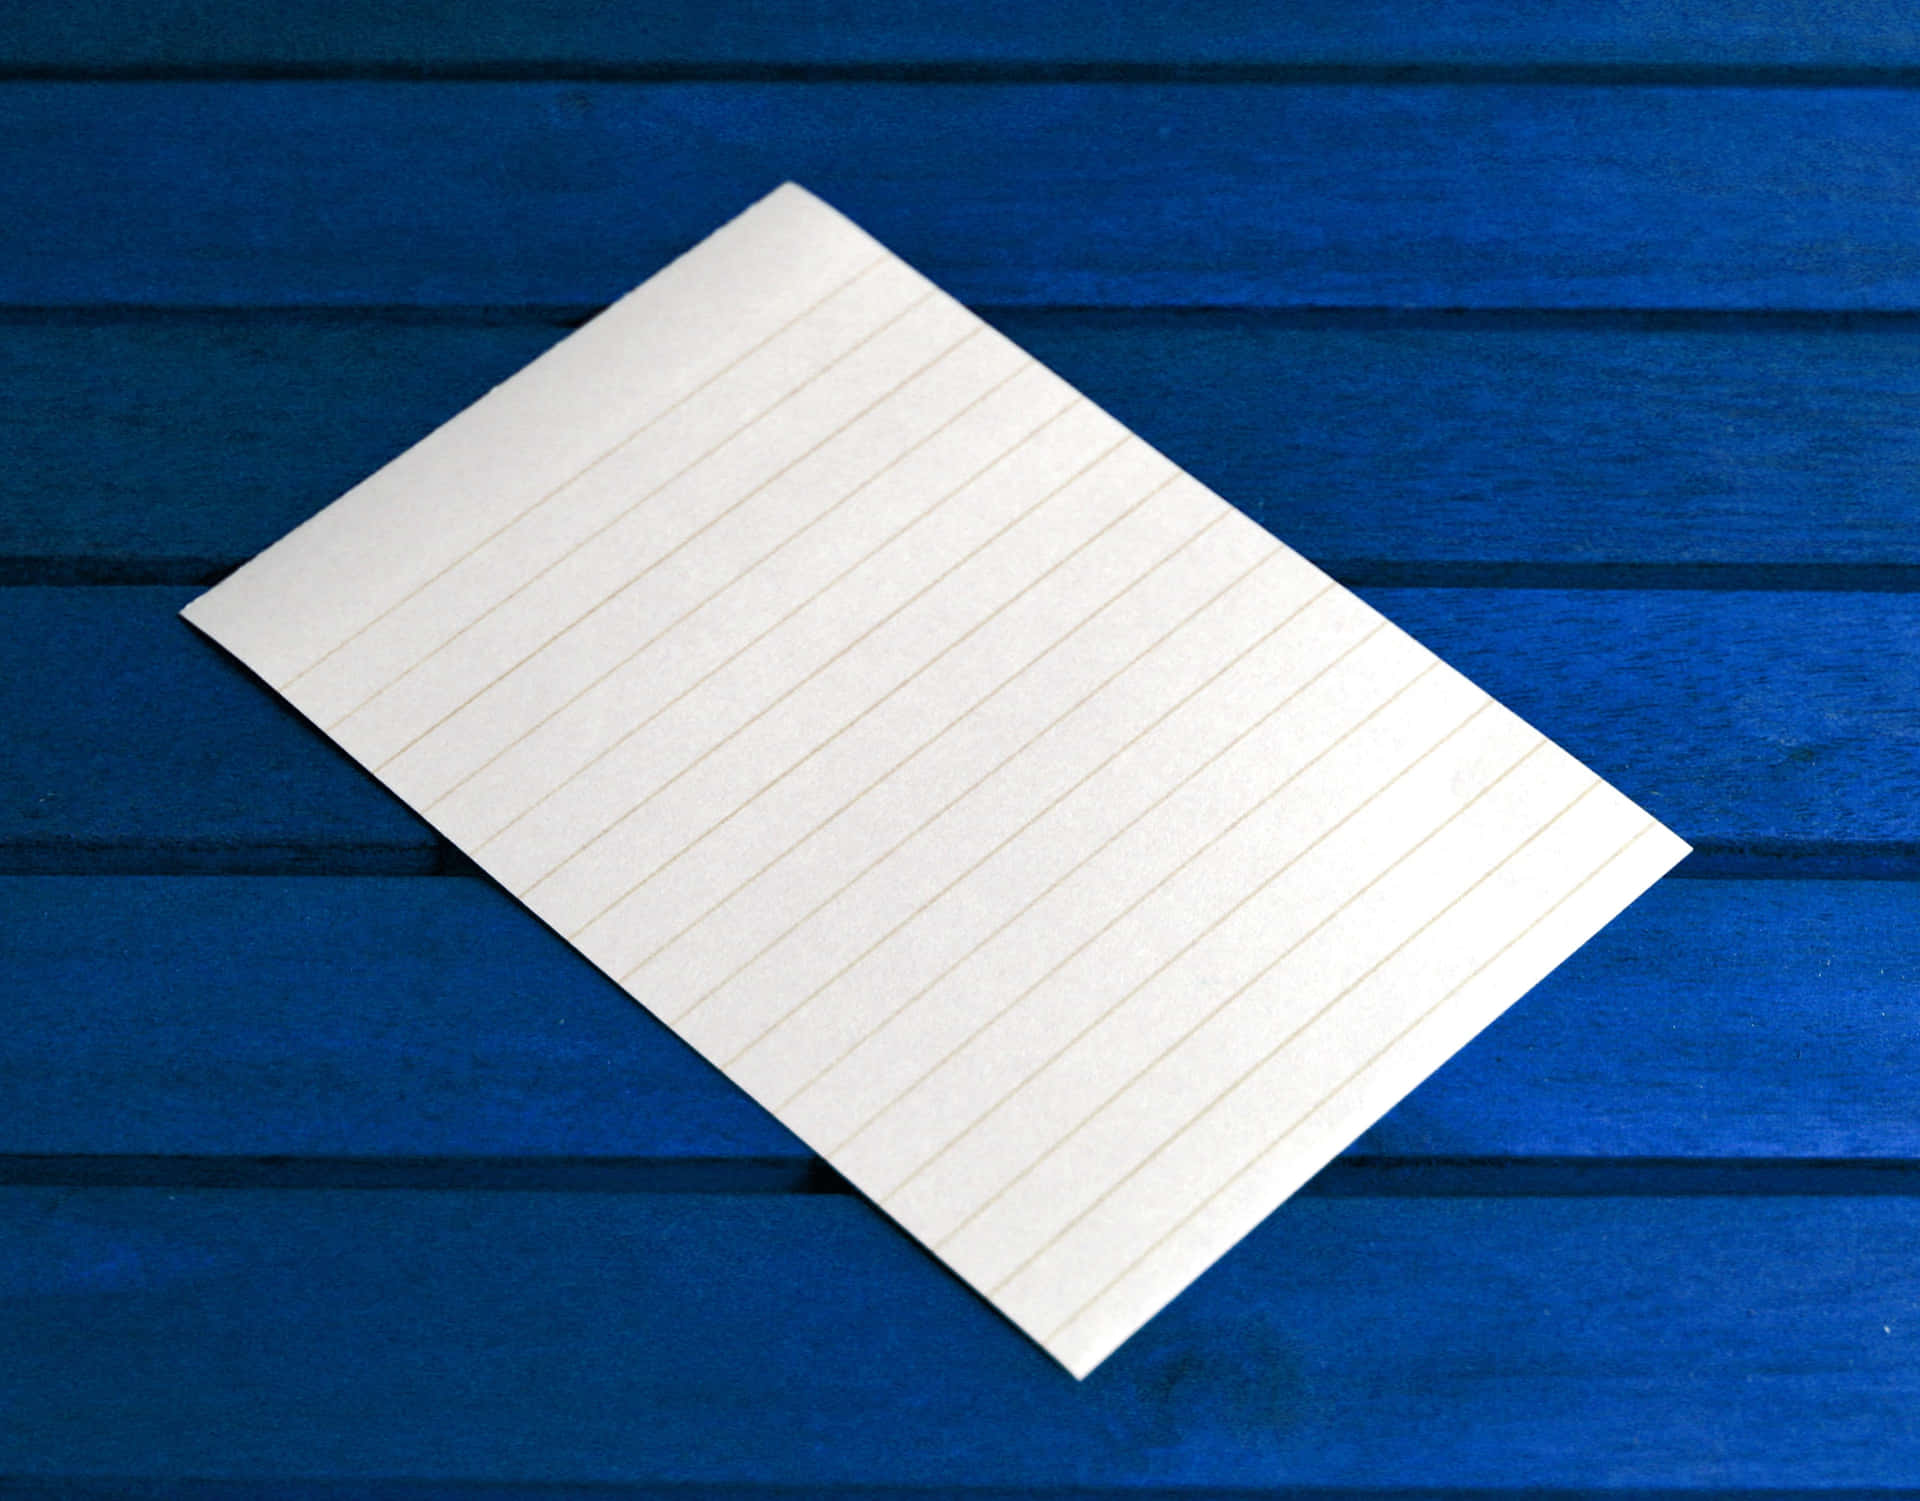 Caption: Neatly Lined Paper Pattern